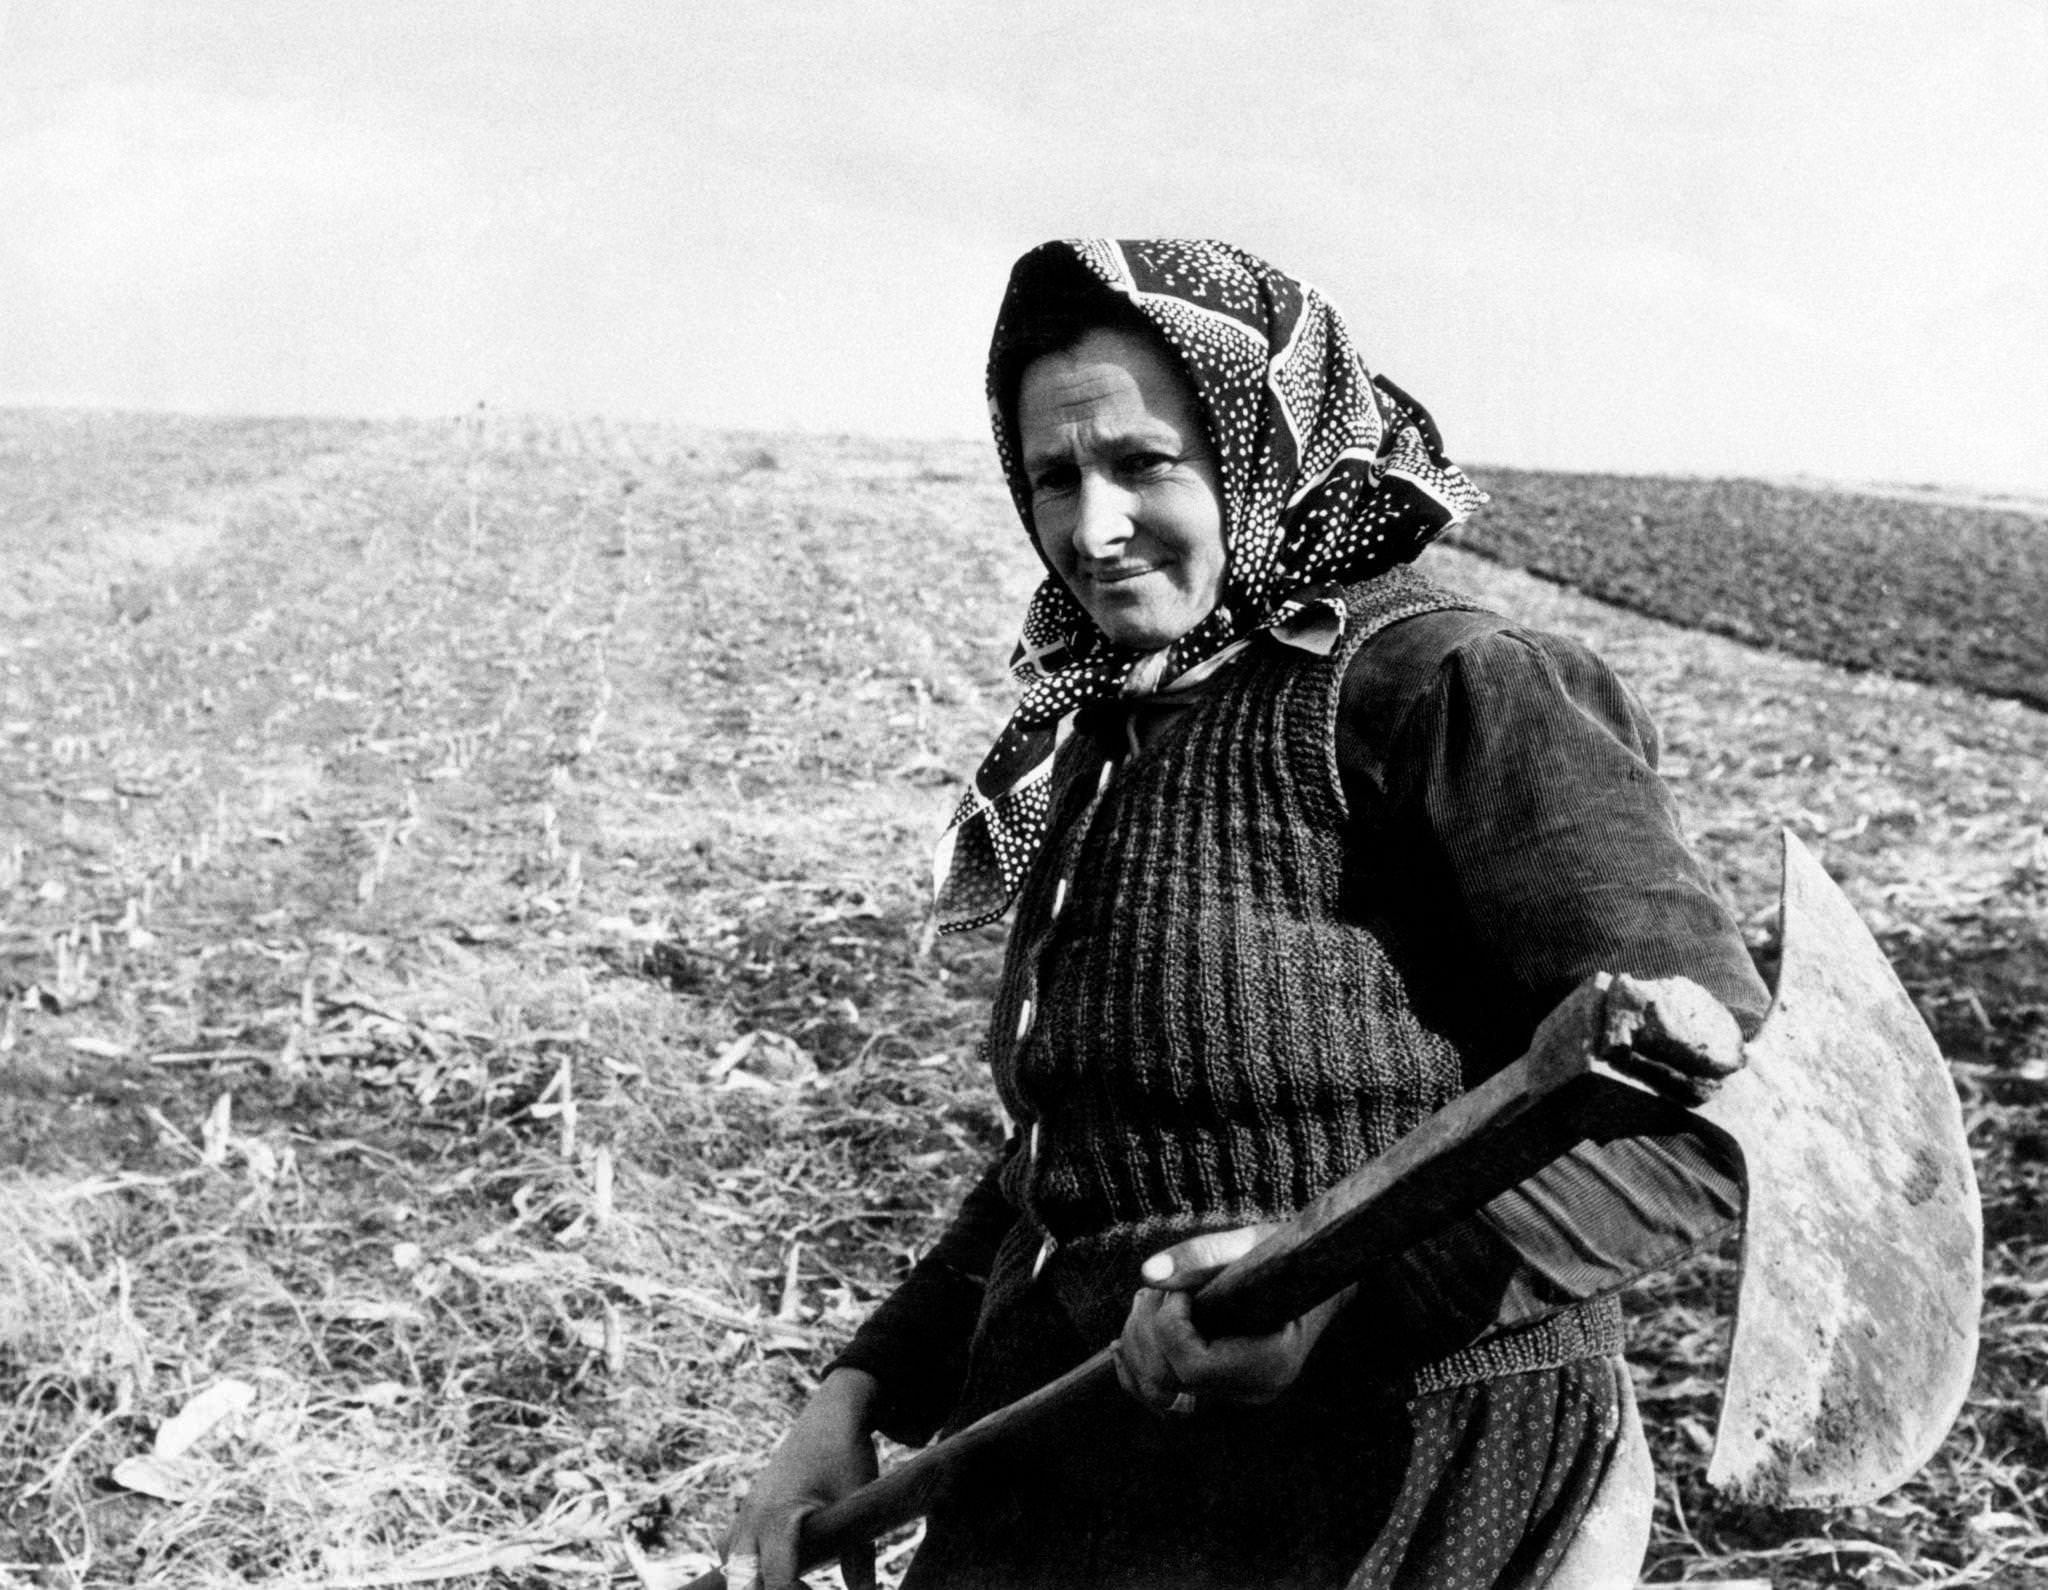 A countrywoman at work in a field with a spade, 20 km far from the capital city of Belgrade, Serbia, 1965